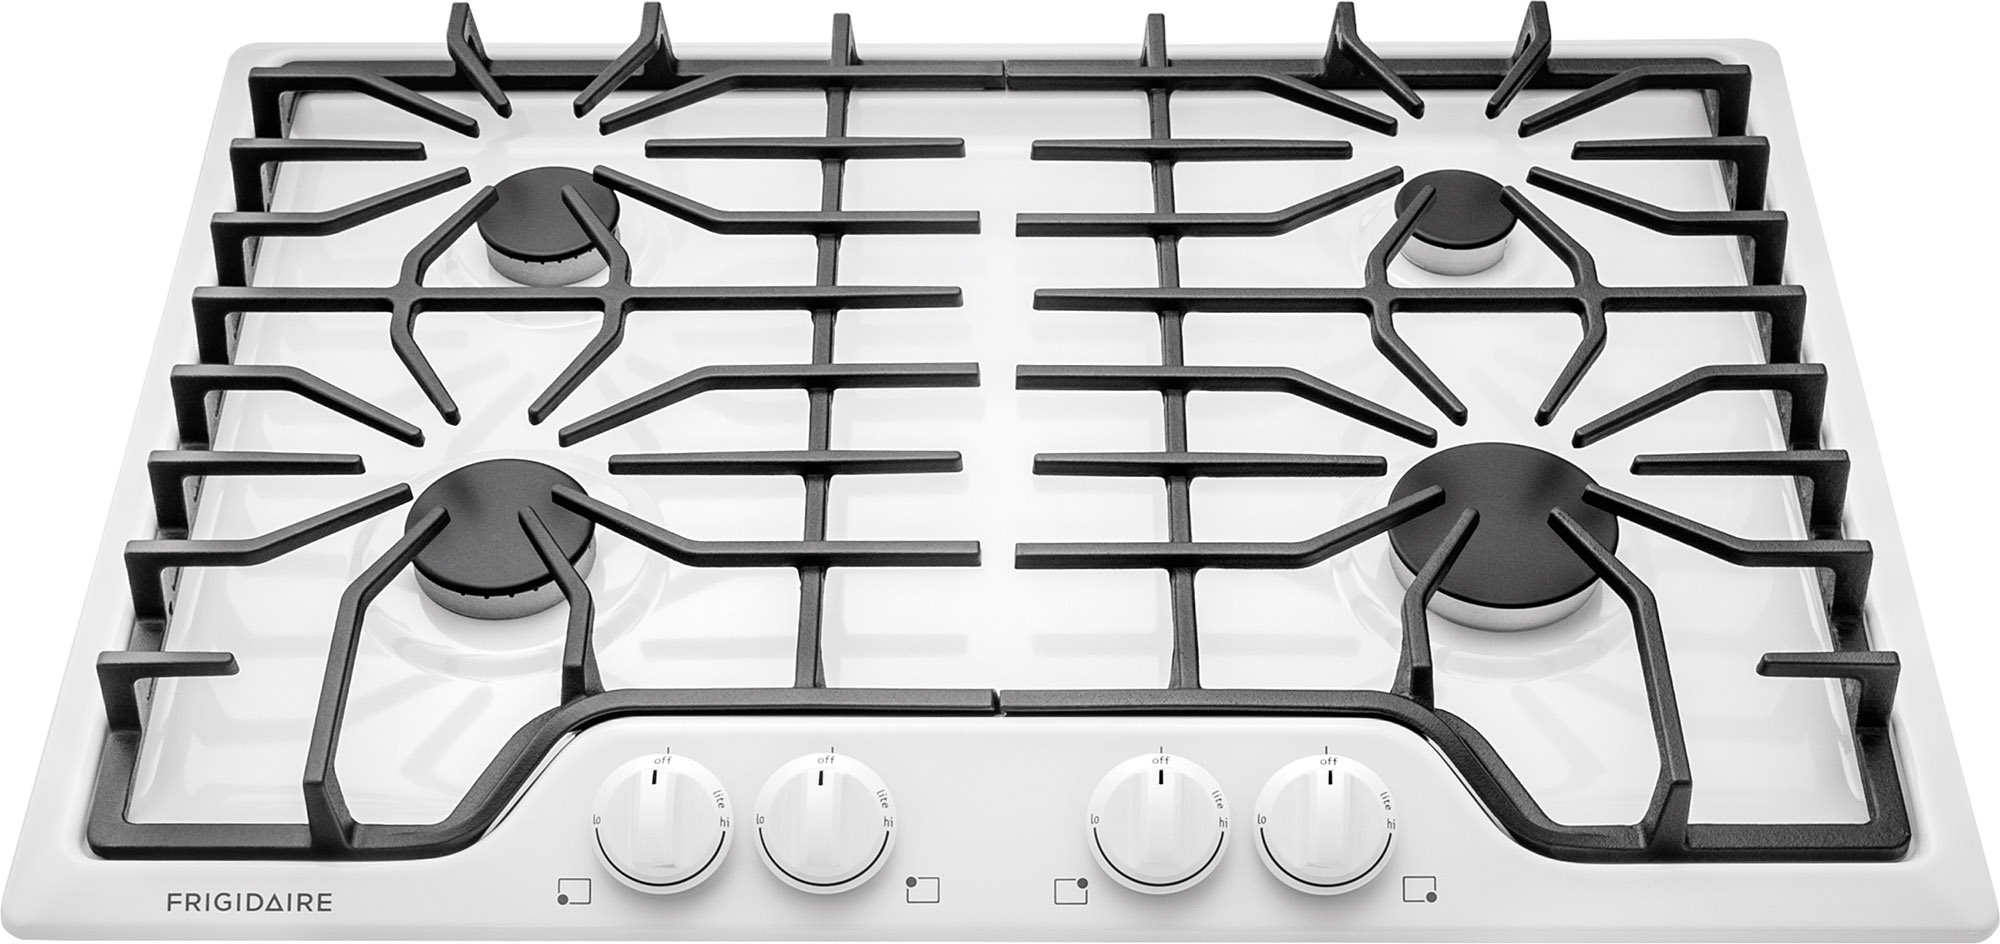 Overhead look at the Frigidaire FFGC3026SW 30” white gas cooktop 